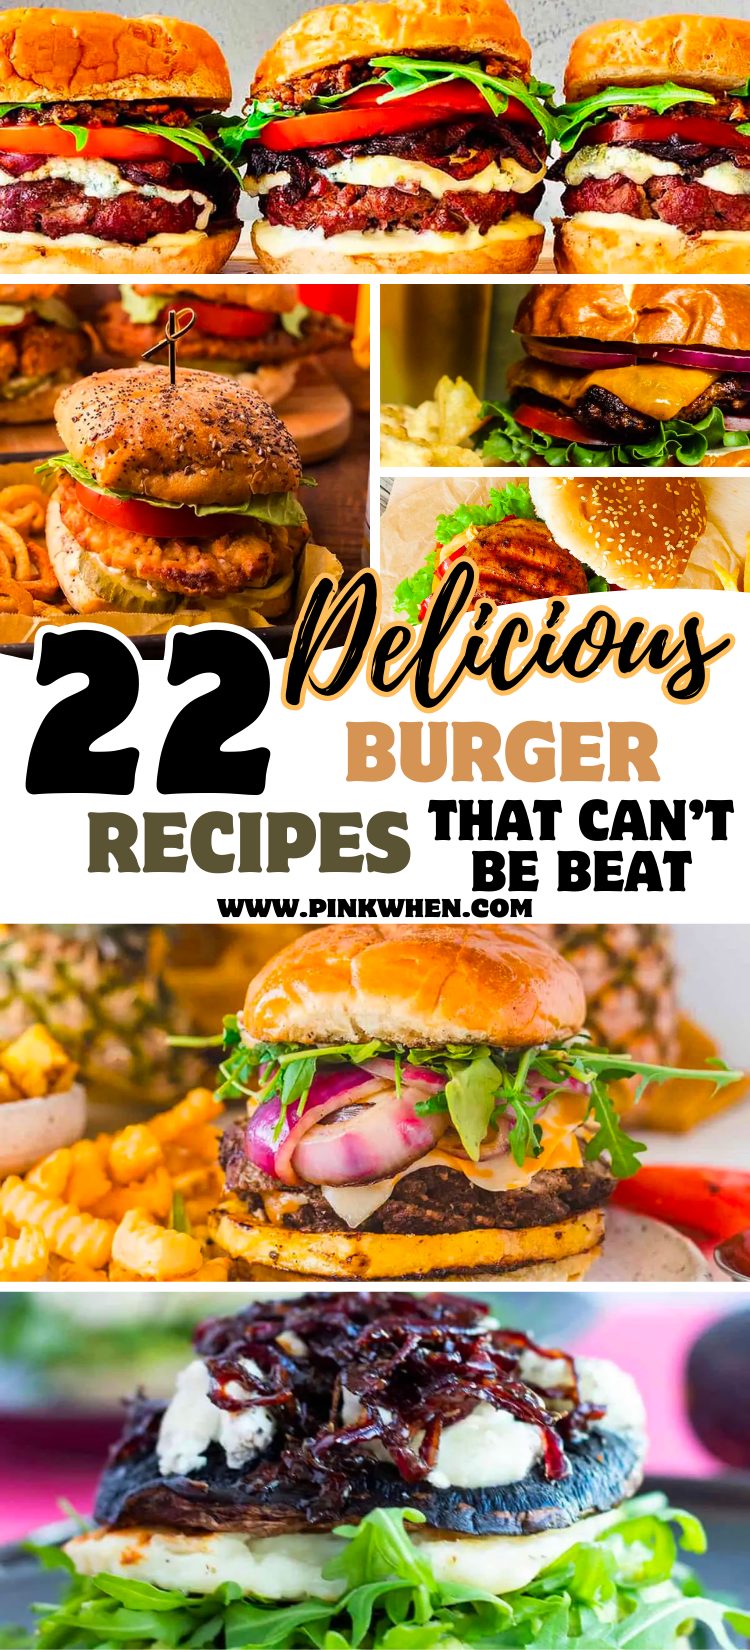 Delicious Burger Recipes That Can’t Be Beat